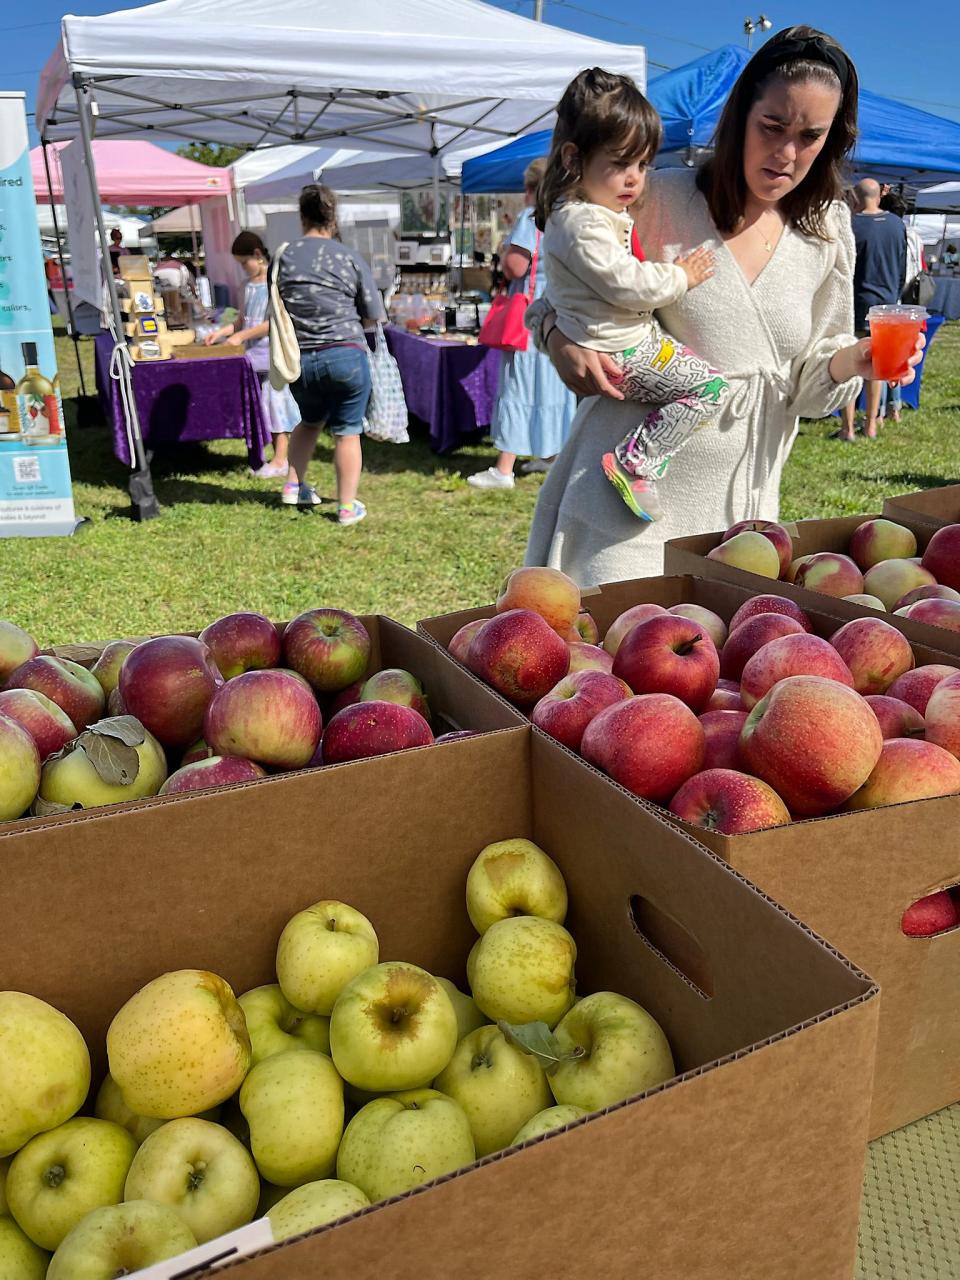 The Tiverton Farmers Market is offering a wide range of fresh produce and locally-sourced products at its outdoor markets this summer.